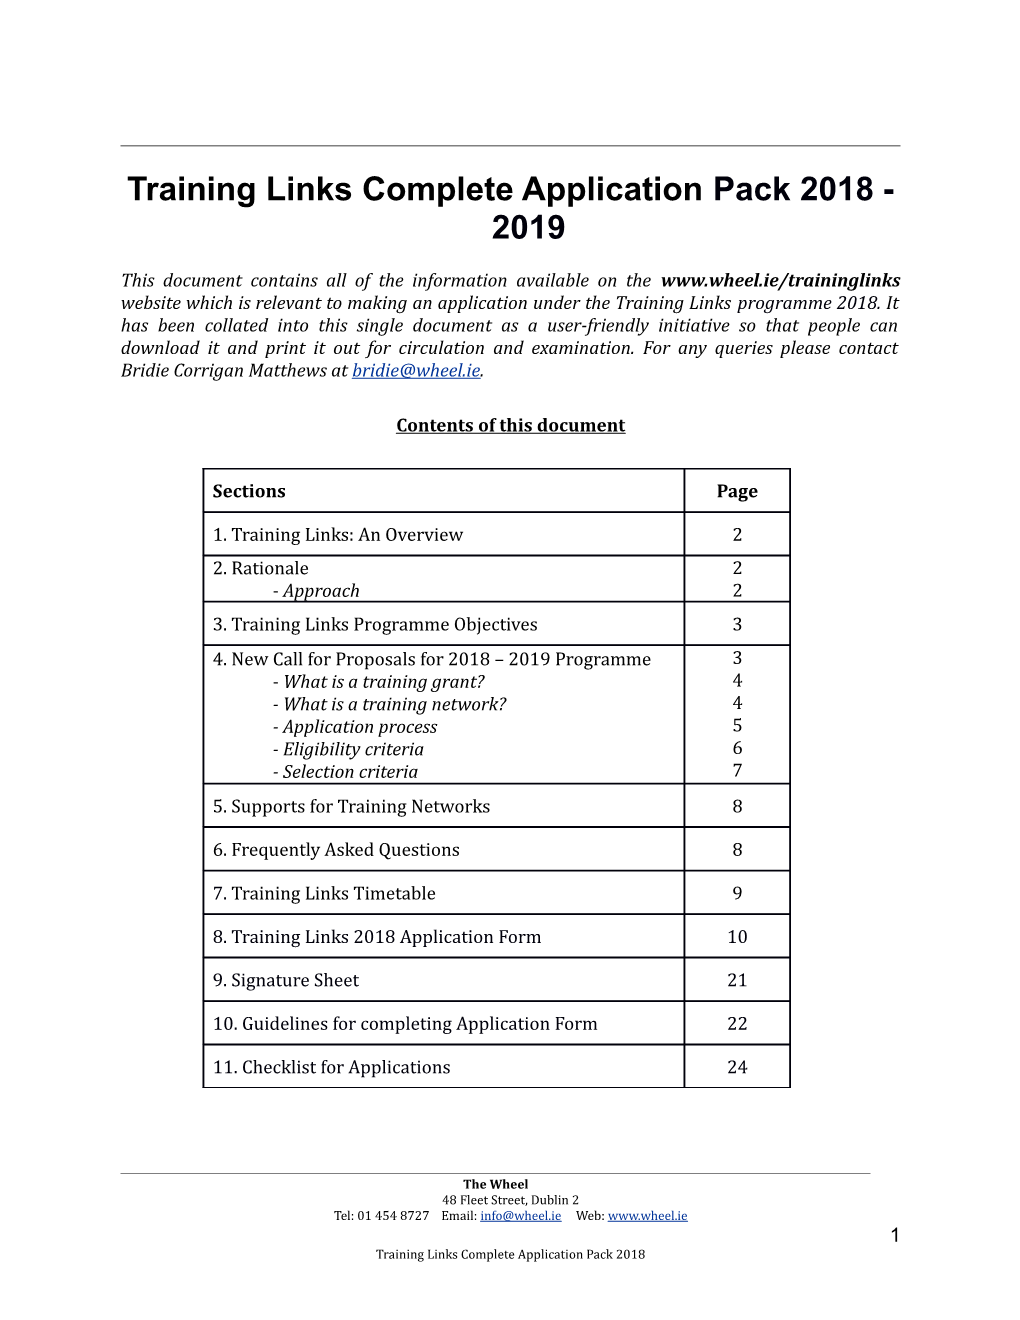 Training Links Complete Application Pack 2018 - 2019